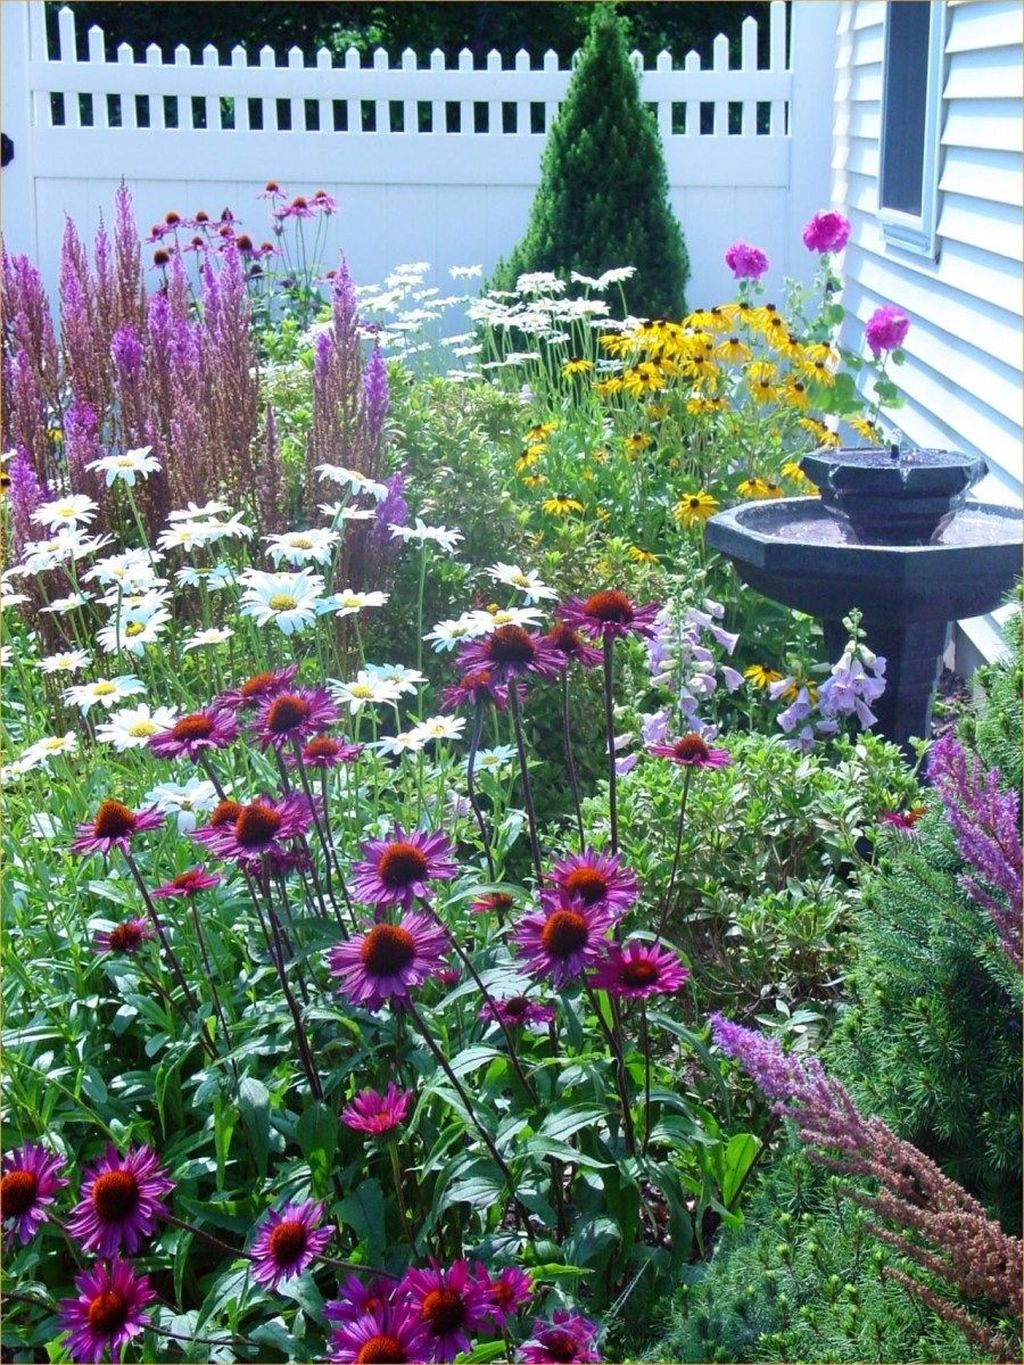 32 Lovely Flower Garden Design Ideas To Beautify Your Outdoor Homyhomee